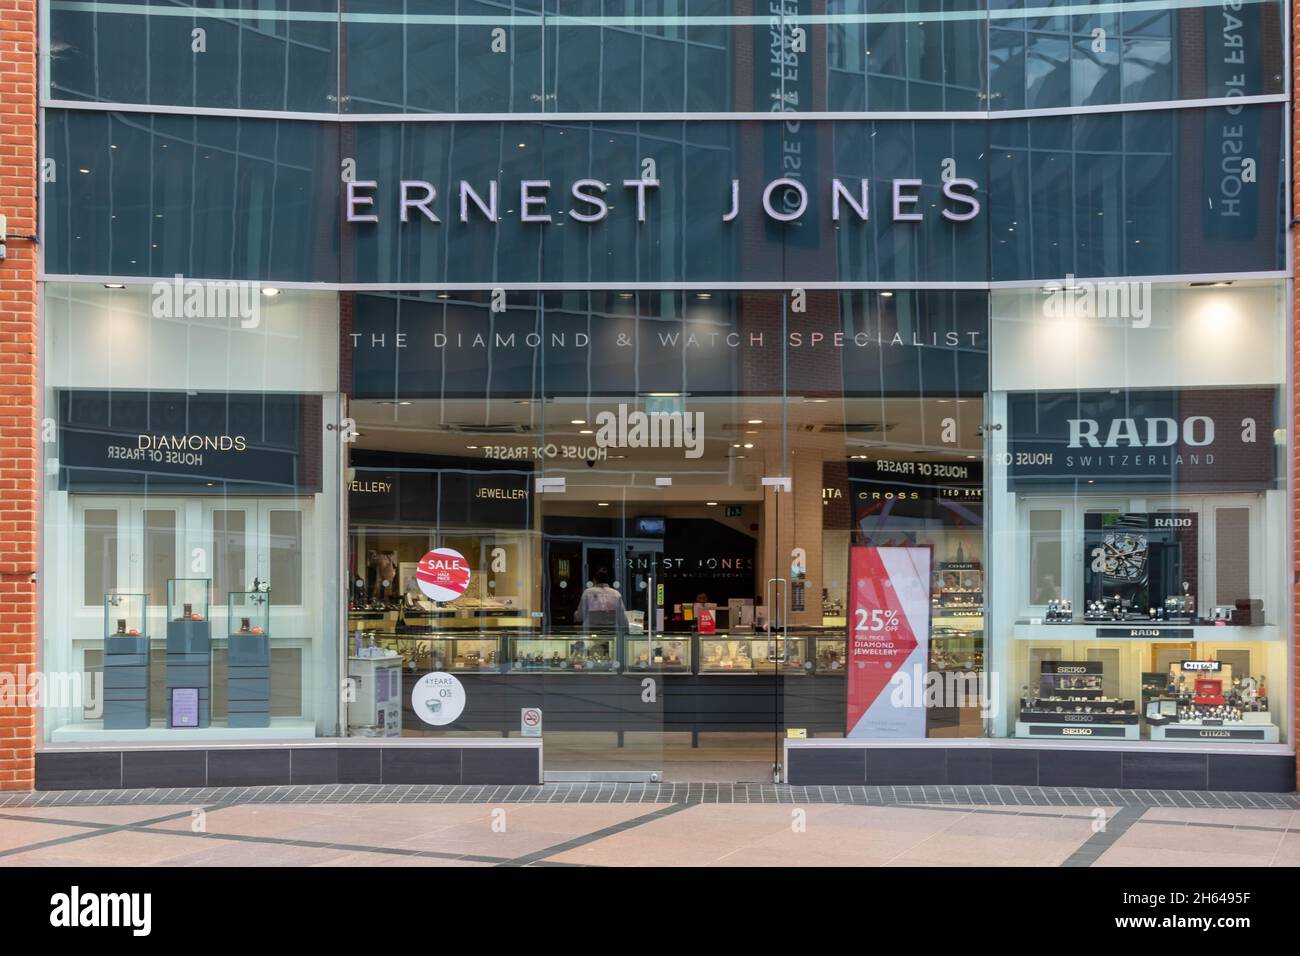 High Wycombe, England - July 21st 2021: Ernest Jones Jewellery shop in the Eden shopping centre. The shop is part of the Signet Jewelers group and has Stock Photo